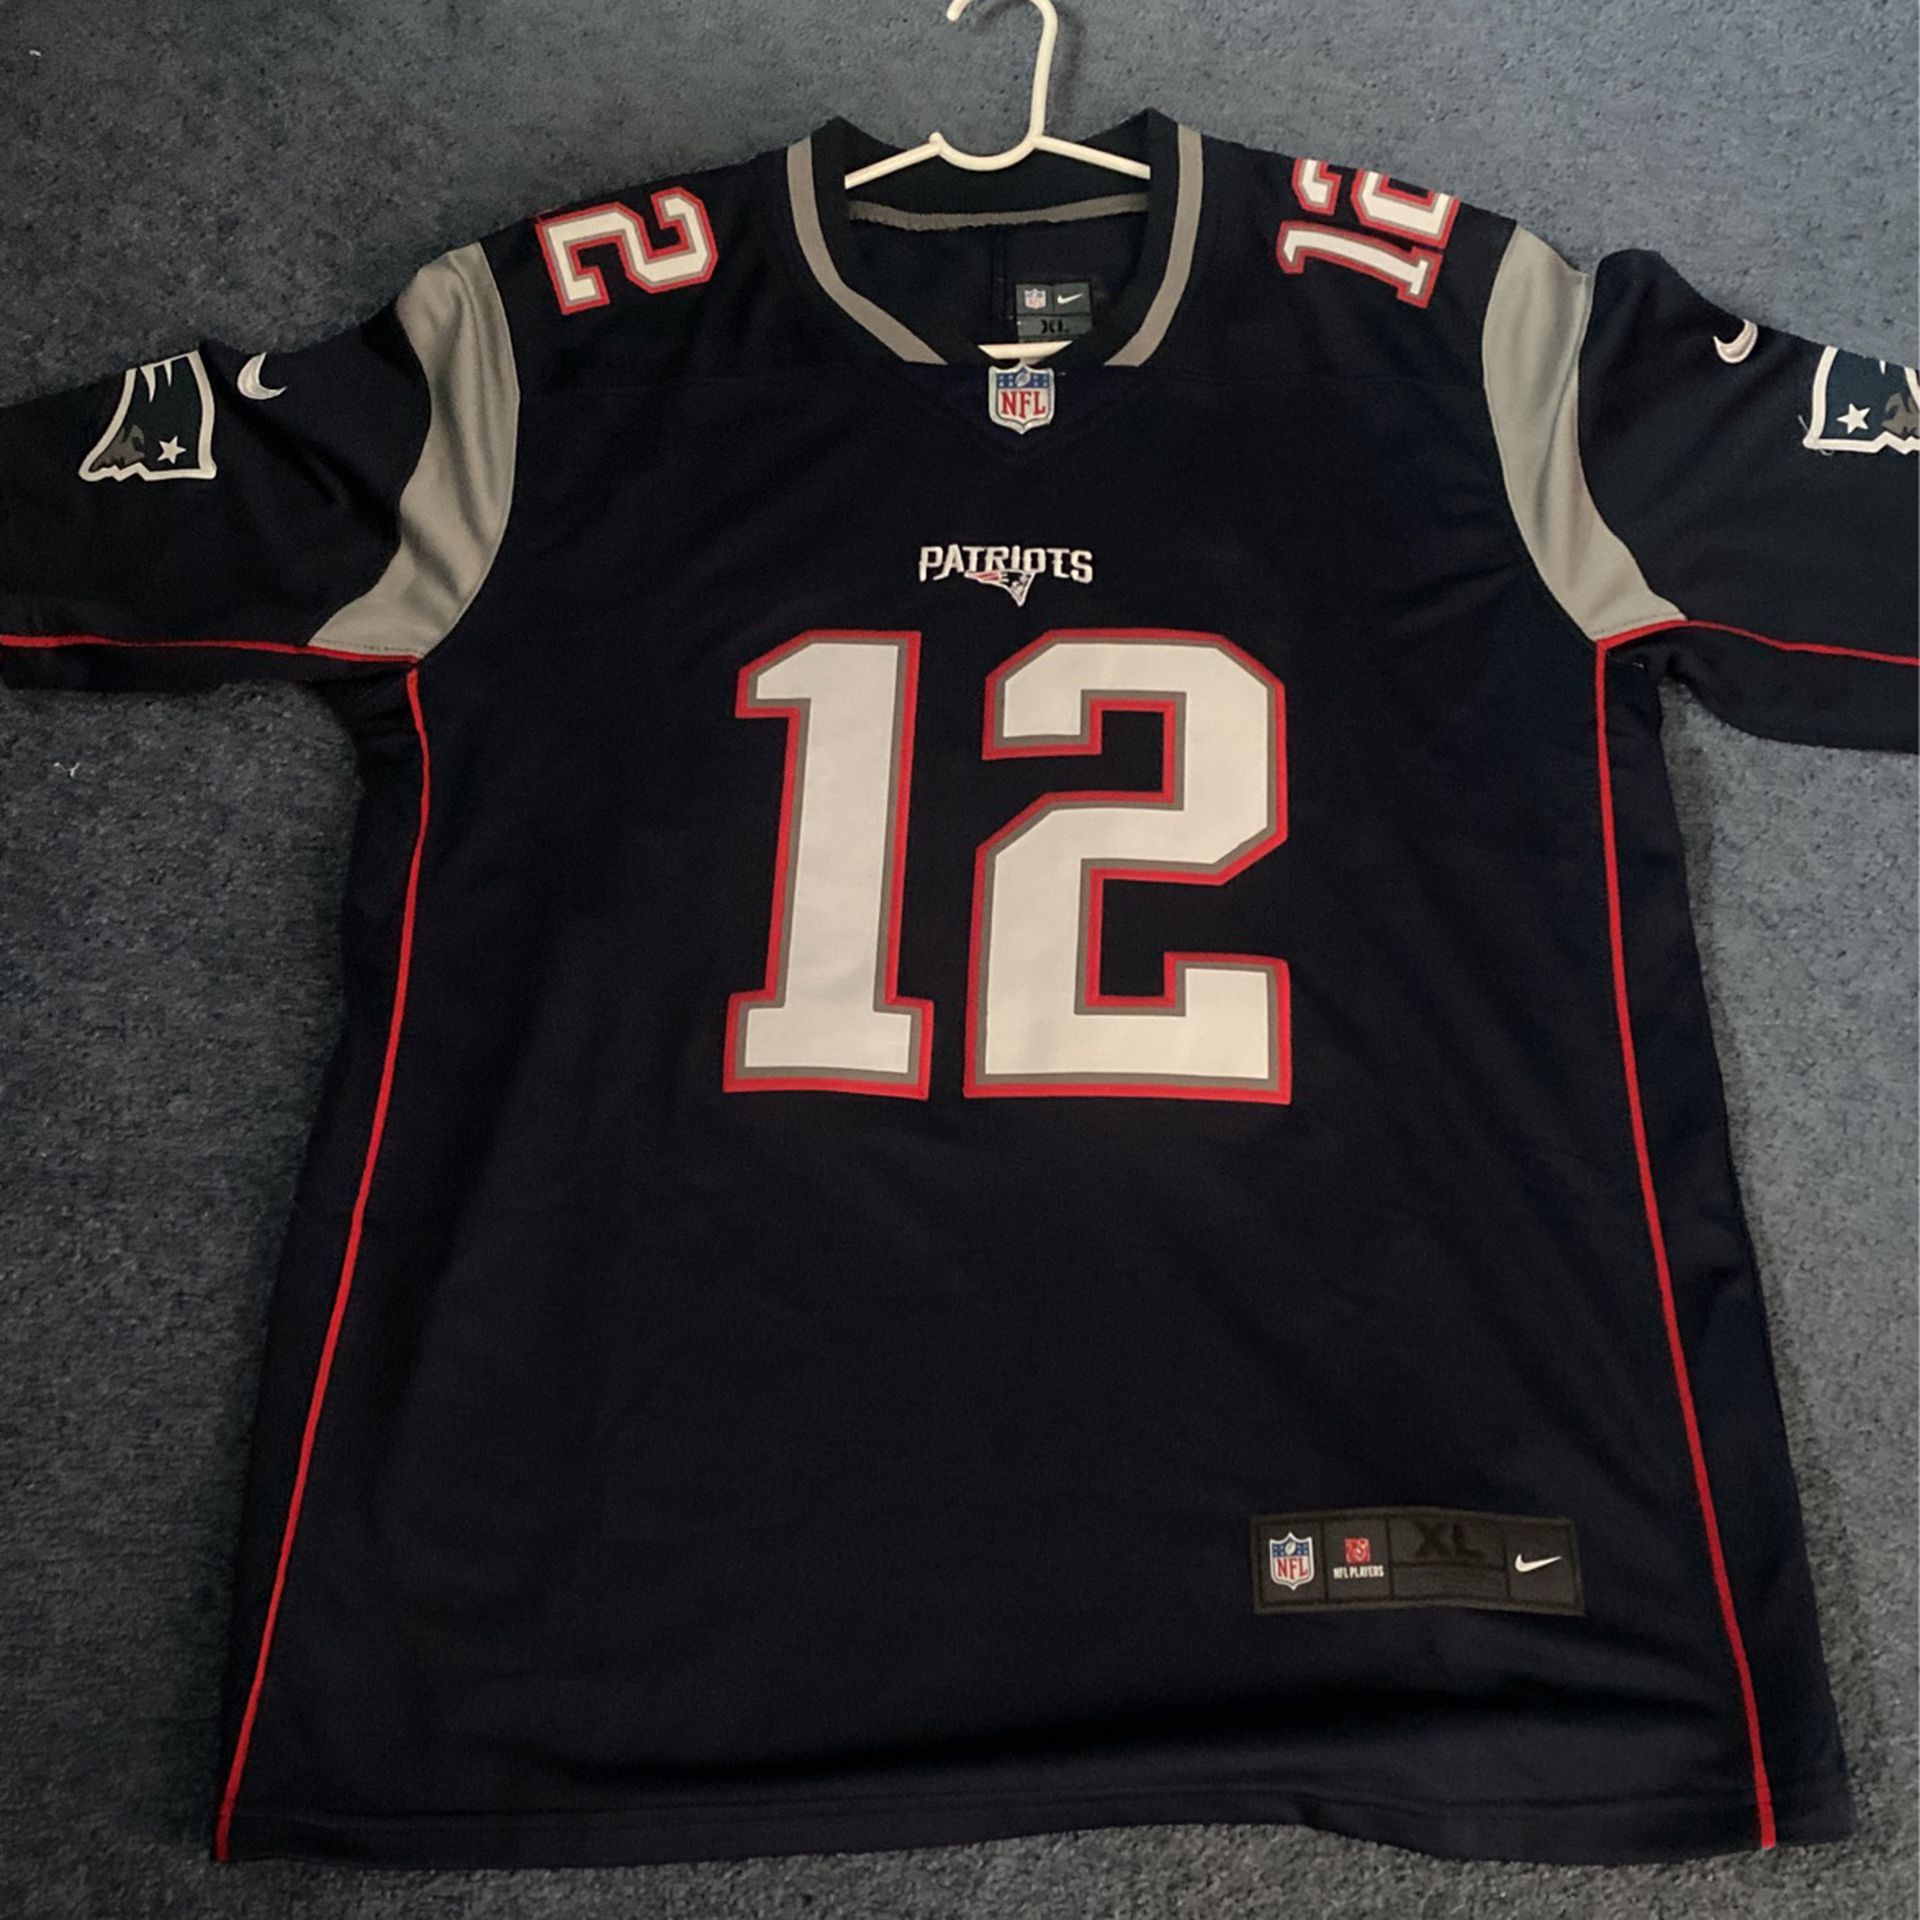 Authentic Tom Brady Patriots jersey for Sale in West Islip, NY - OfferUp